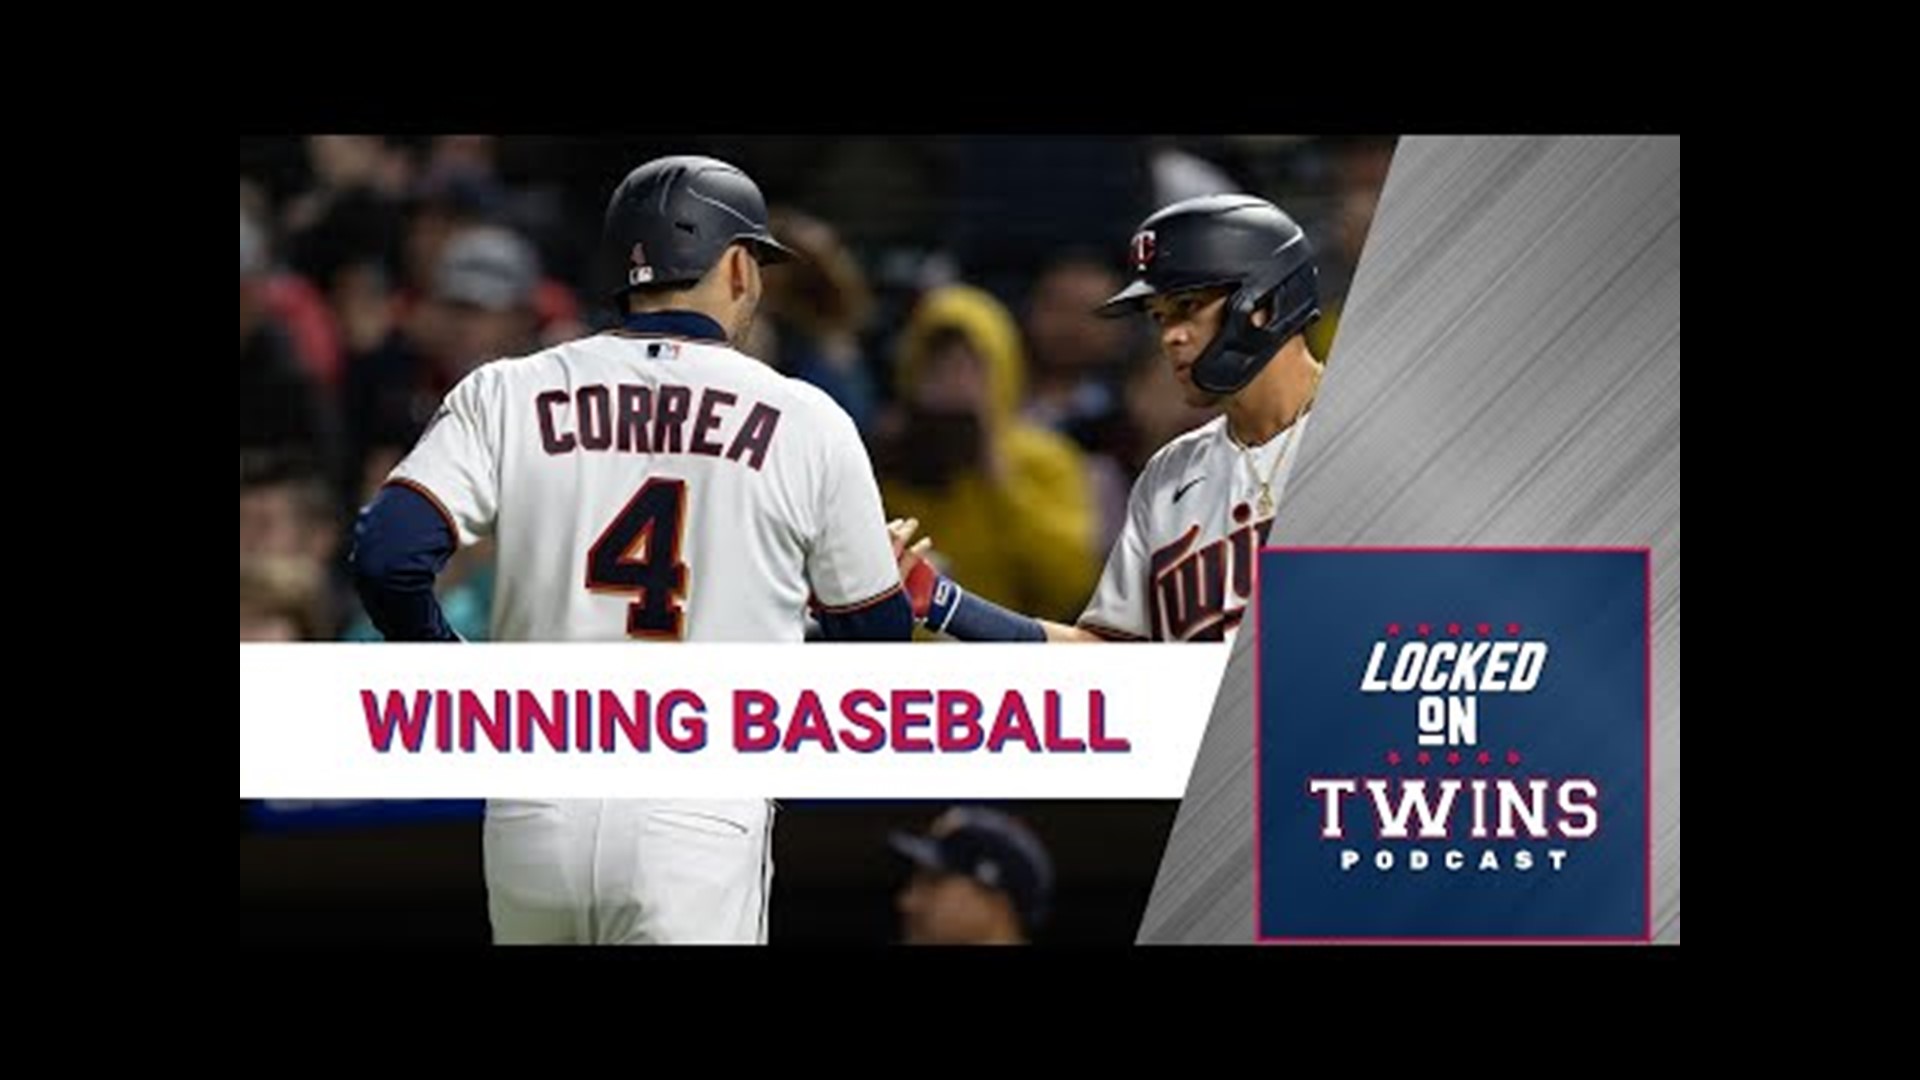 The Minnesota Twins have won nine of their last 10 games, putting a rough 4-8 start in the rearview en route to a first-place hold in the American League Central.